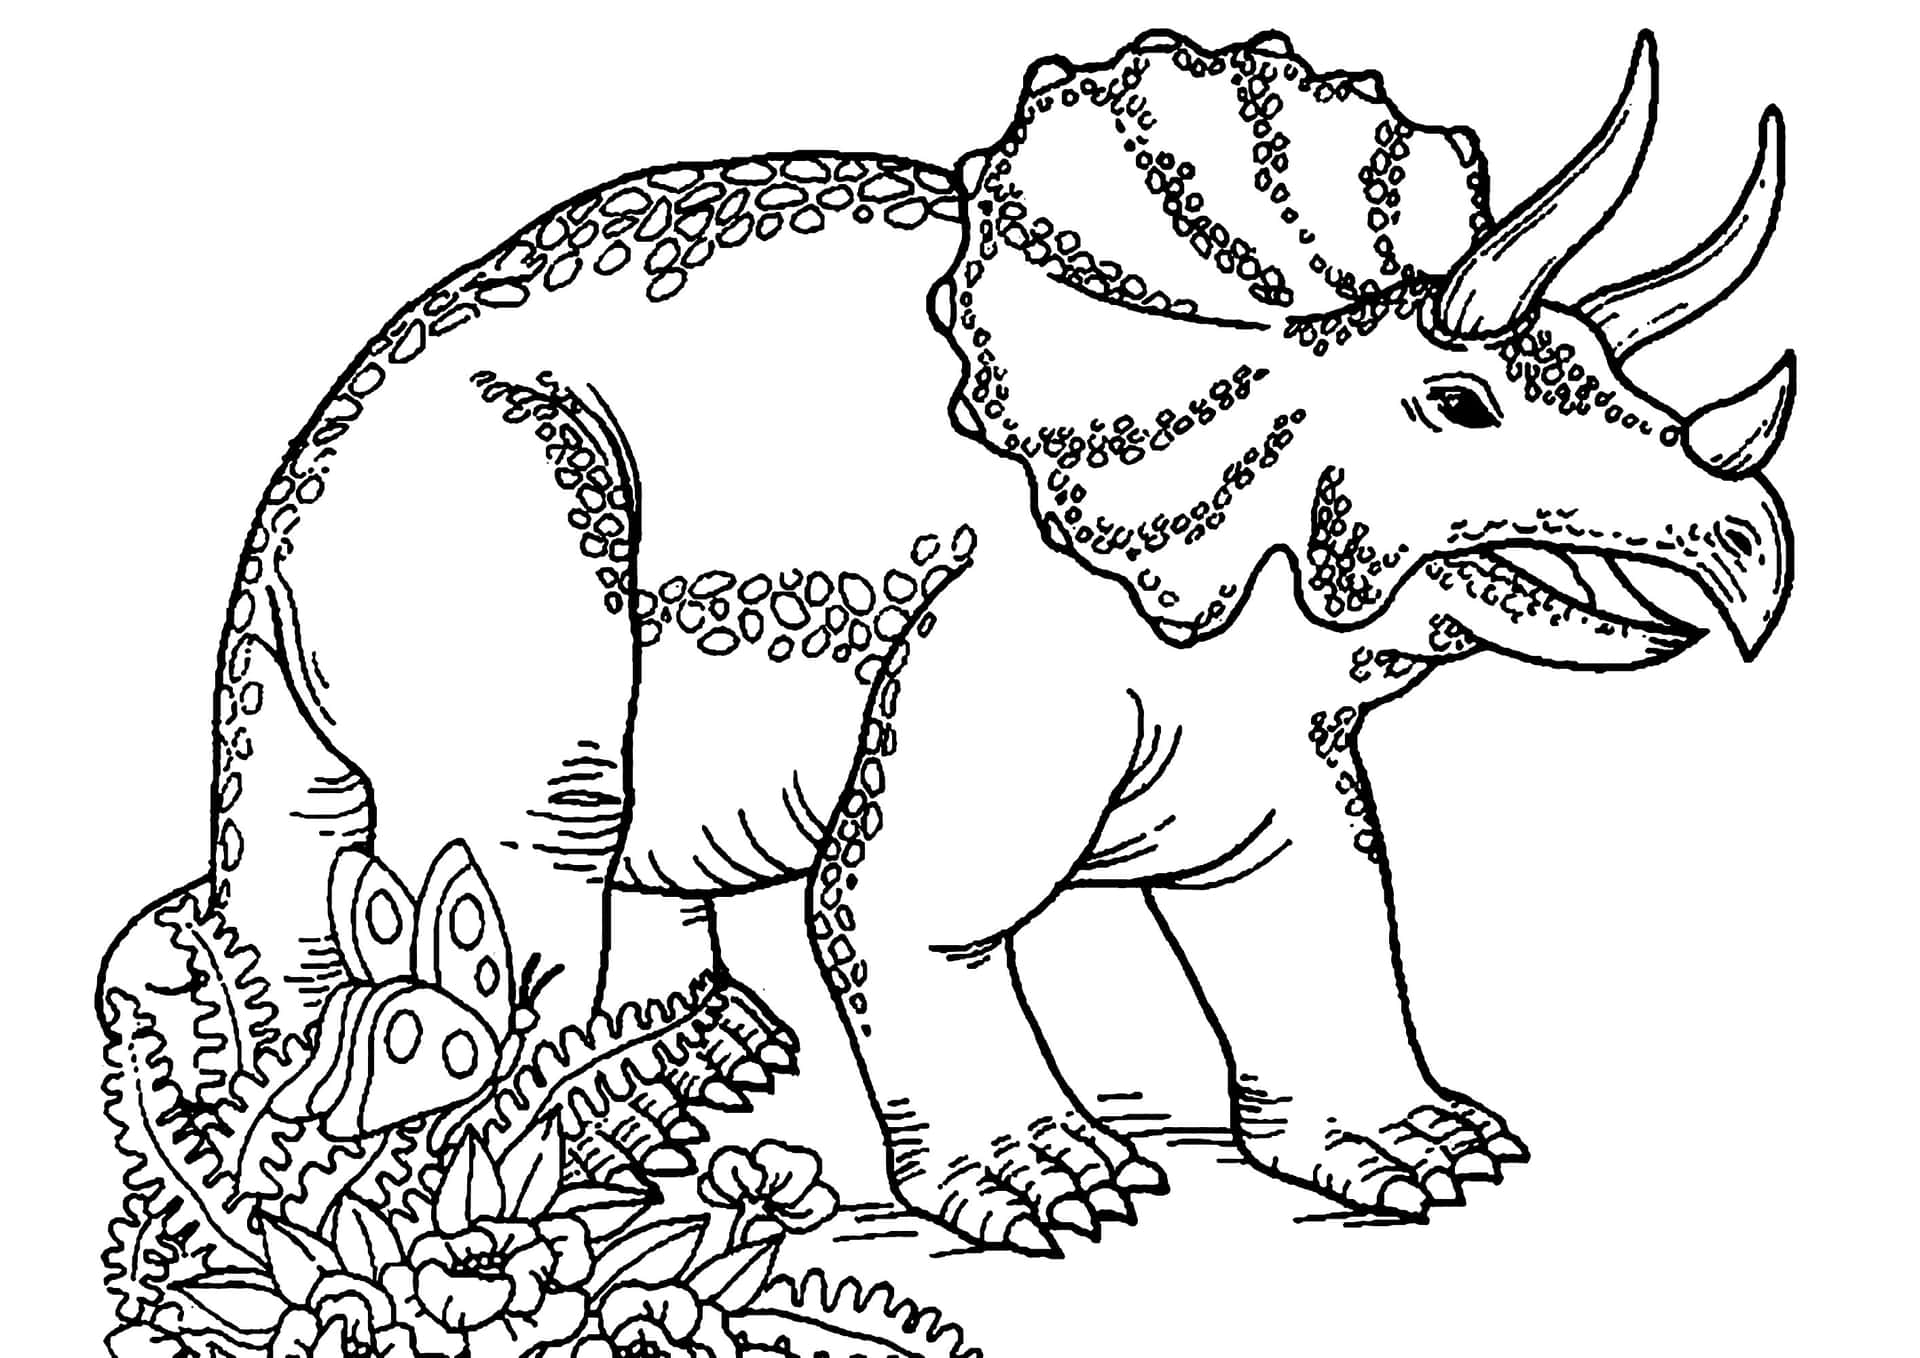 A Jurassic World of Dinosaurs: Color Them Today